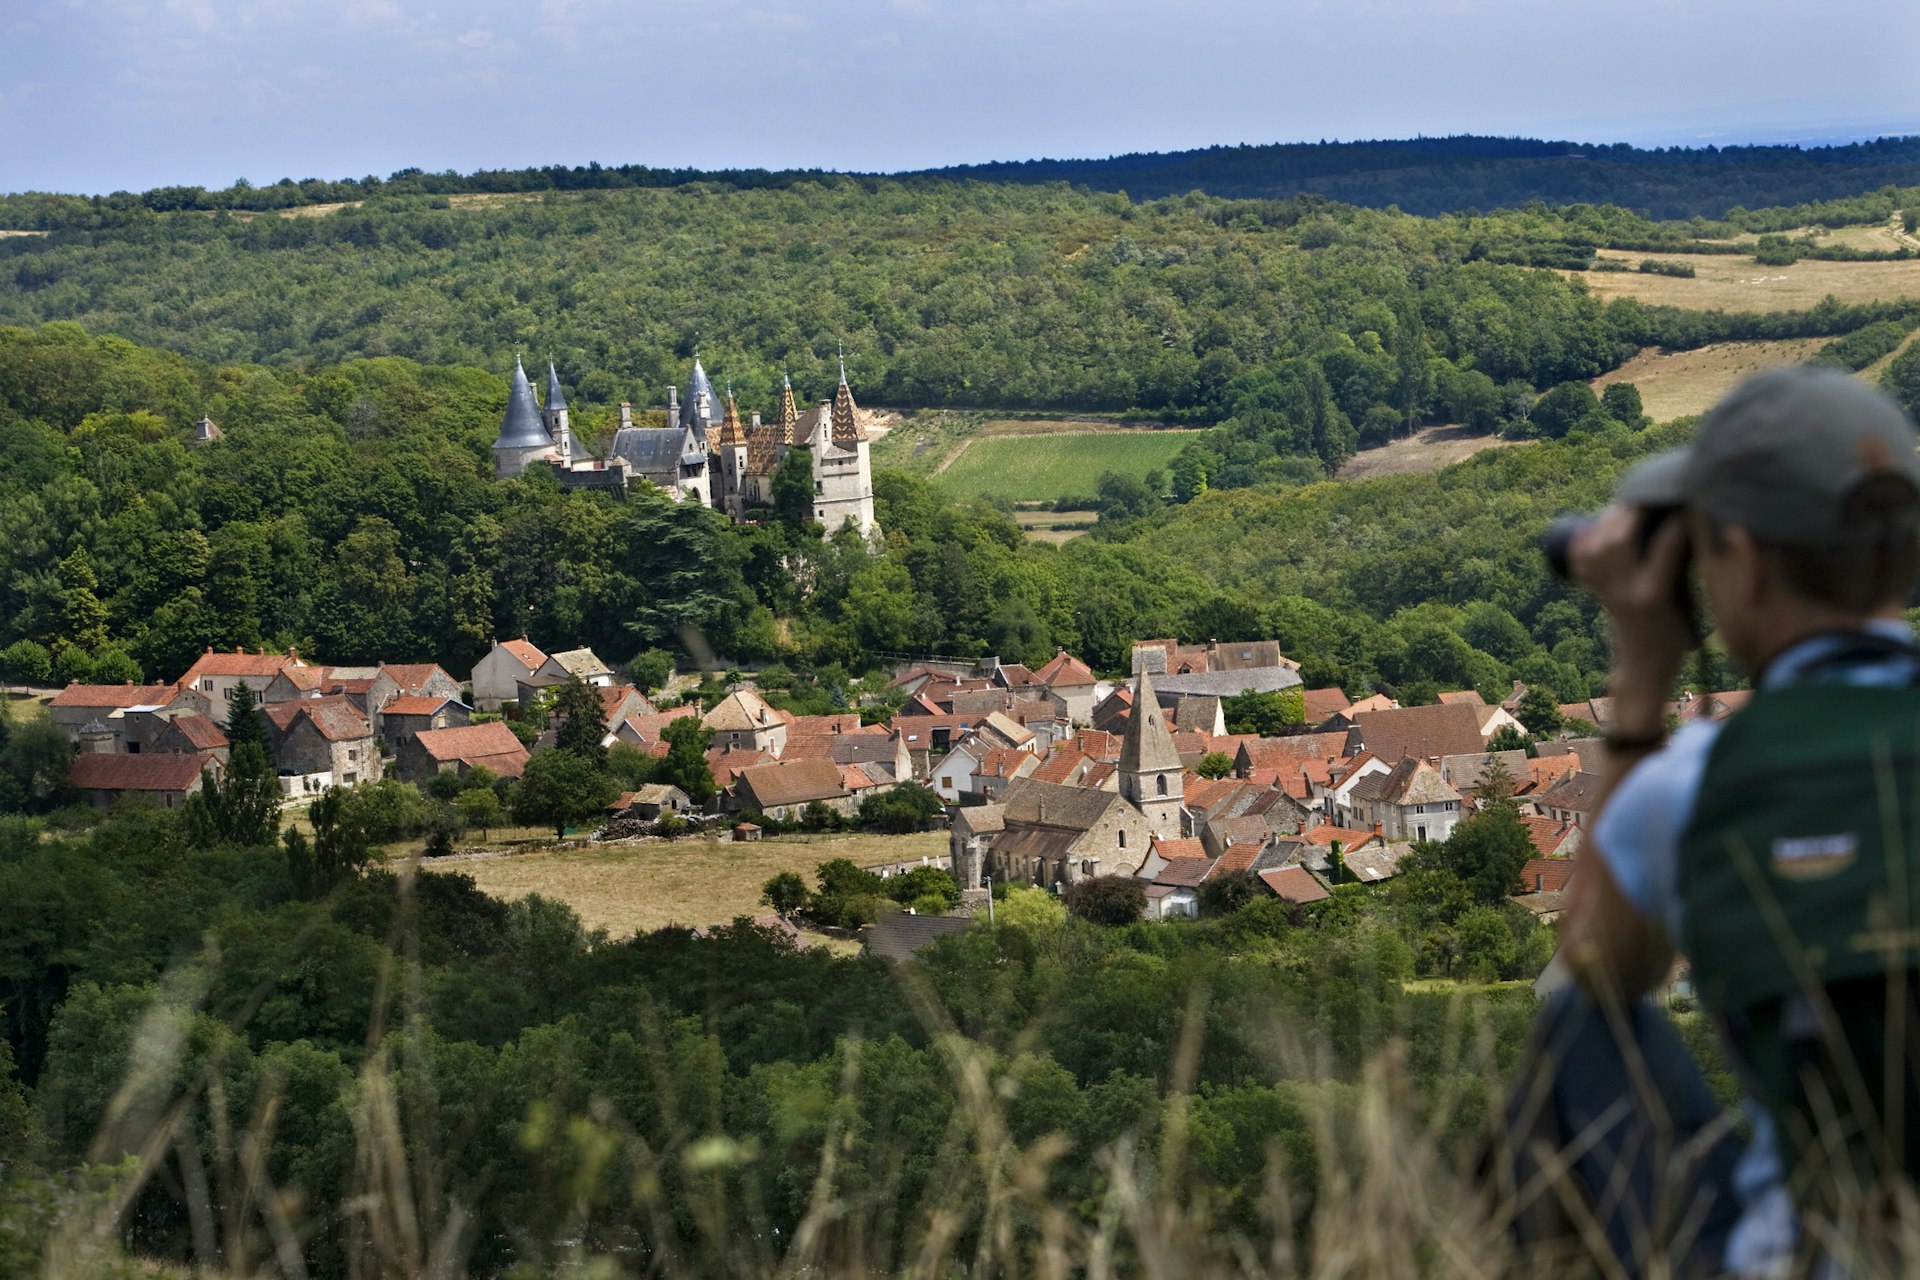 A woman using binoculars focuses in on the village and castle of La Rochepot in Burgundy, France